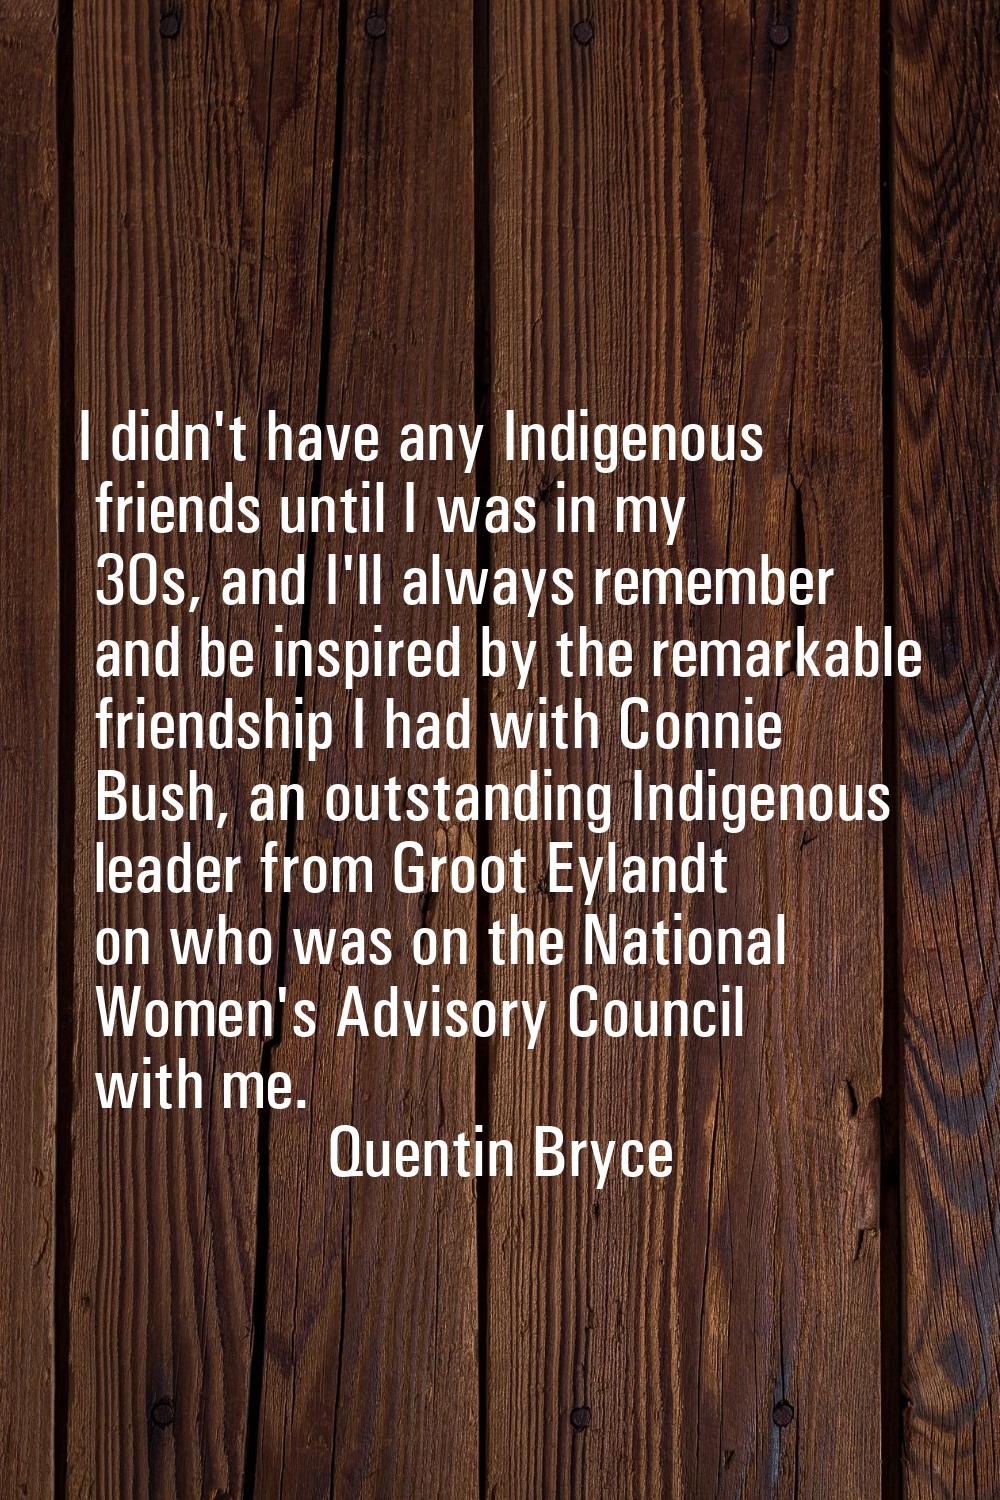 I didn't have any Indigenous friends until I was in my 30s, and I'll always remember and be inspire